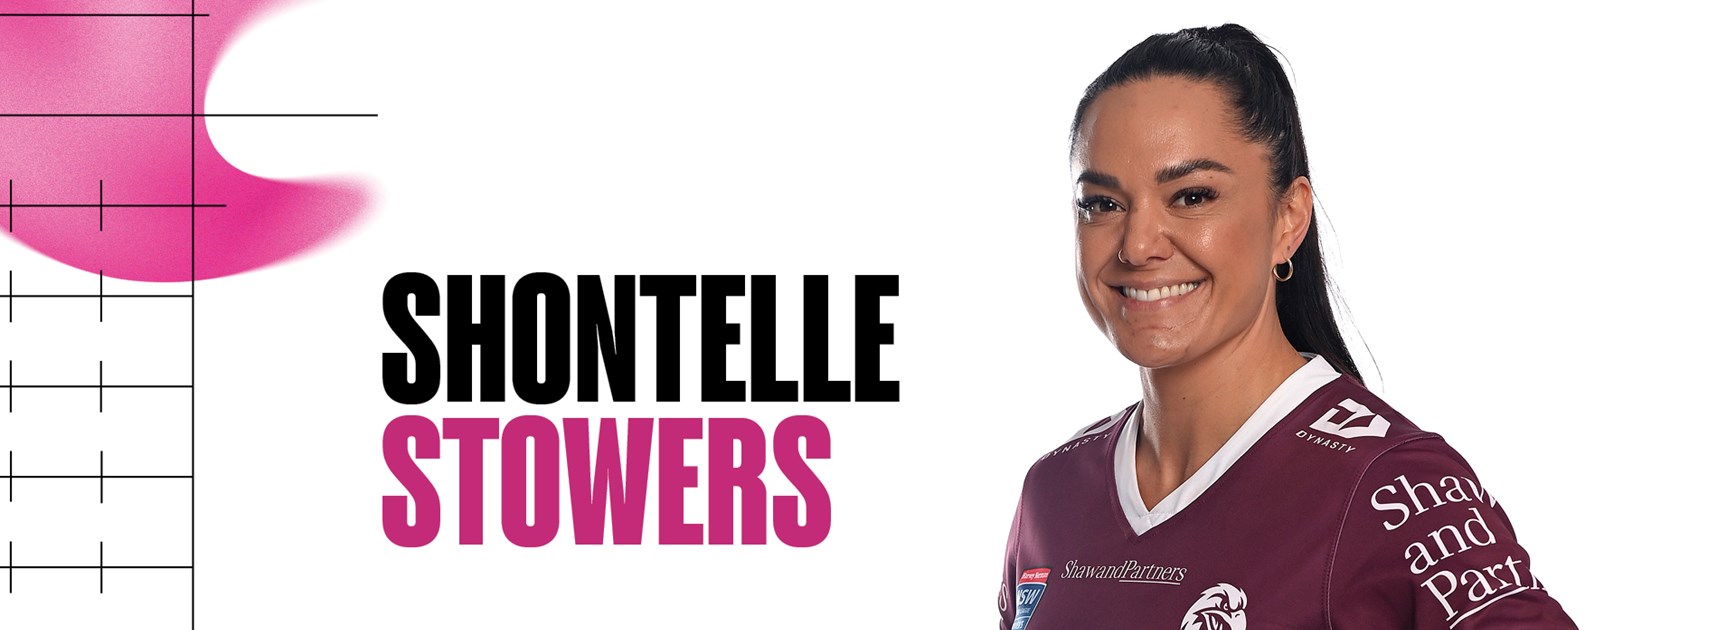 Getting to know: Shontelle Stowers